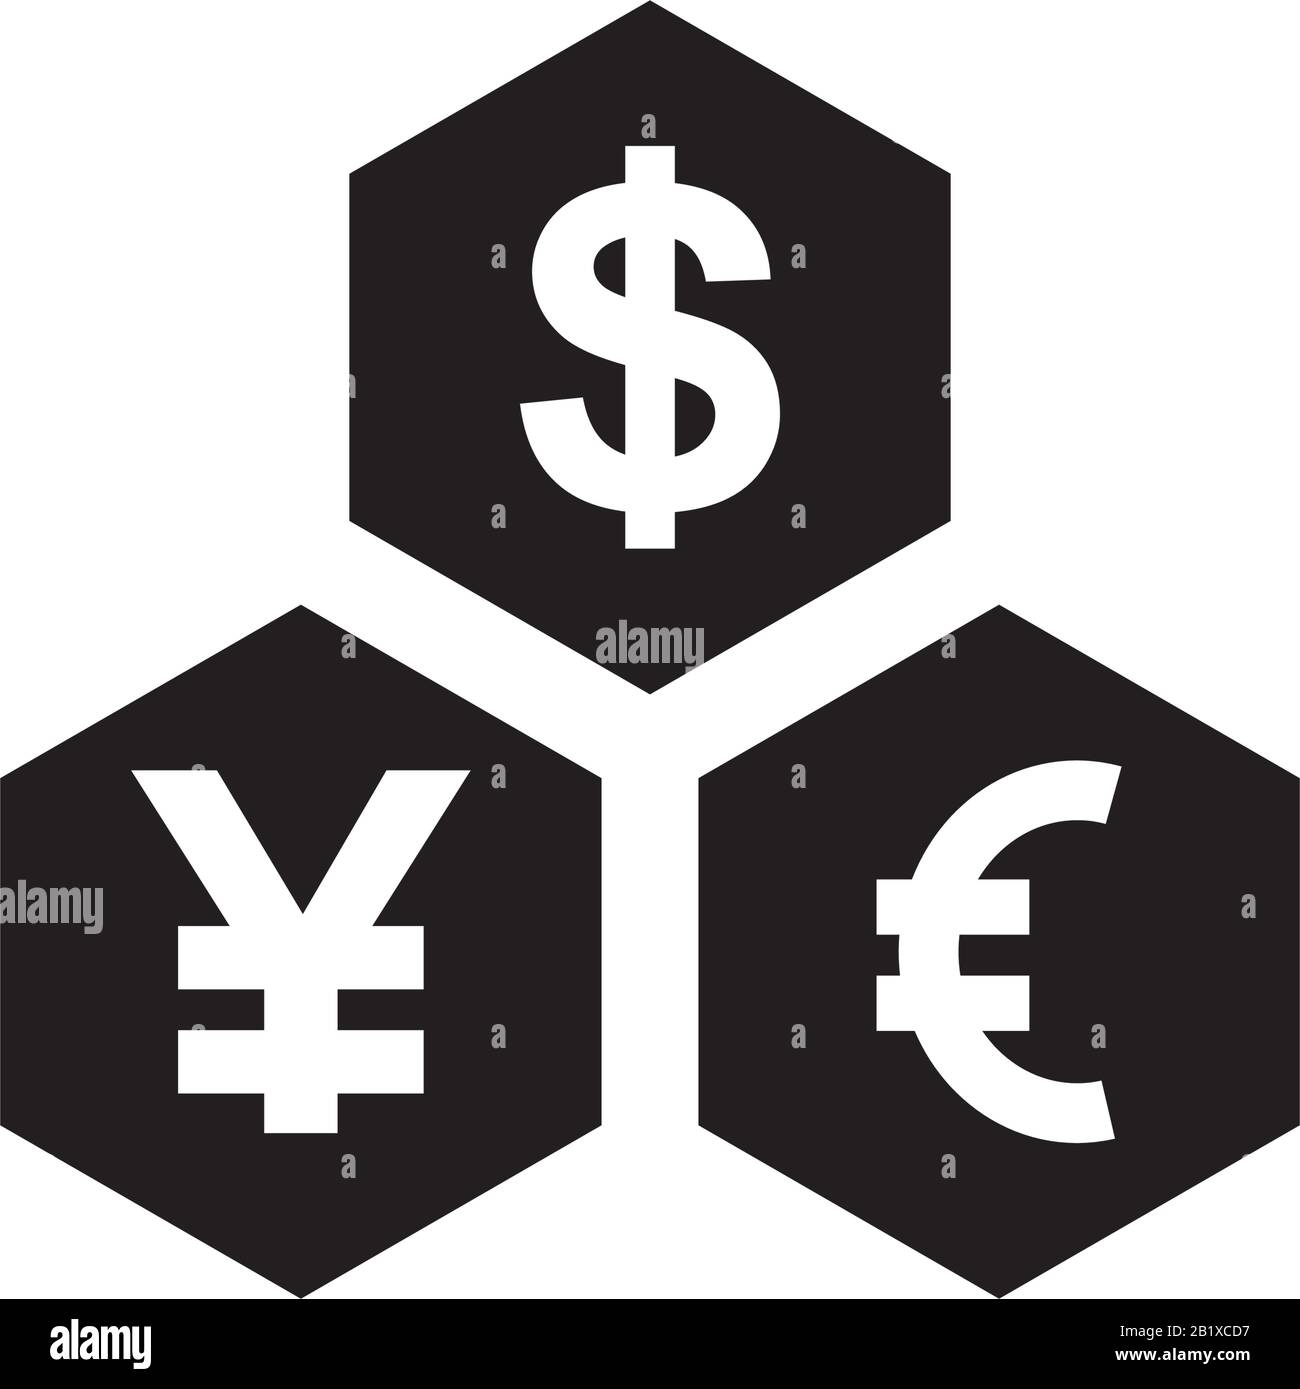 Dollar Euro Yen download icon template black color editable. Dollar Euro Yen download icon symbol Flat vector illustration for graphic and web design. Stock Vector